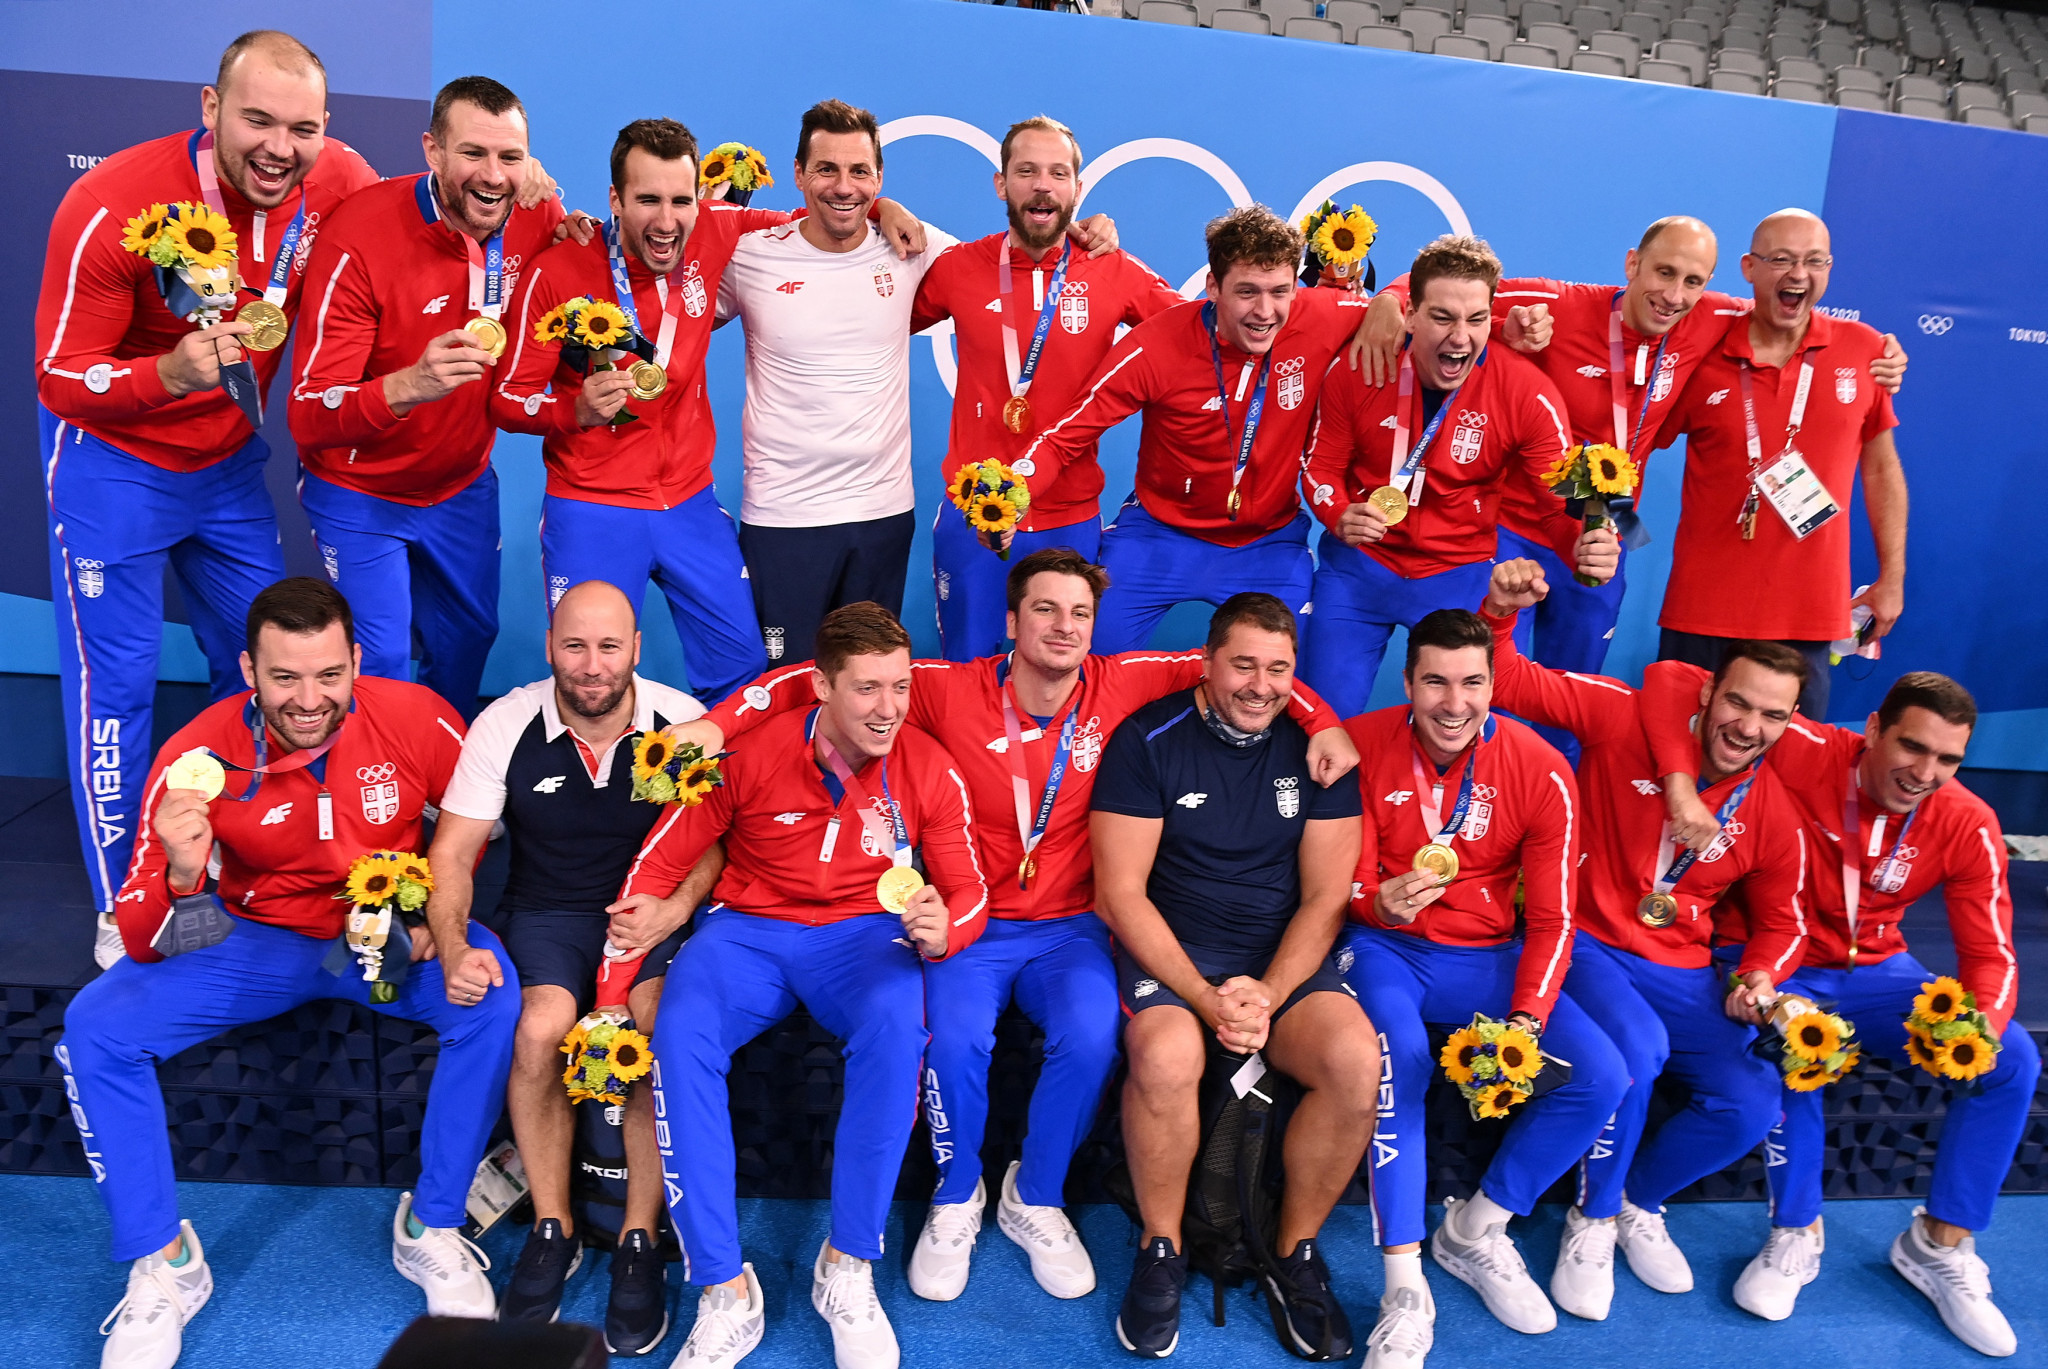 Serbia defended the water polo gold medal they won at Rio 2016 ©Getty Images